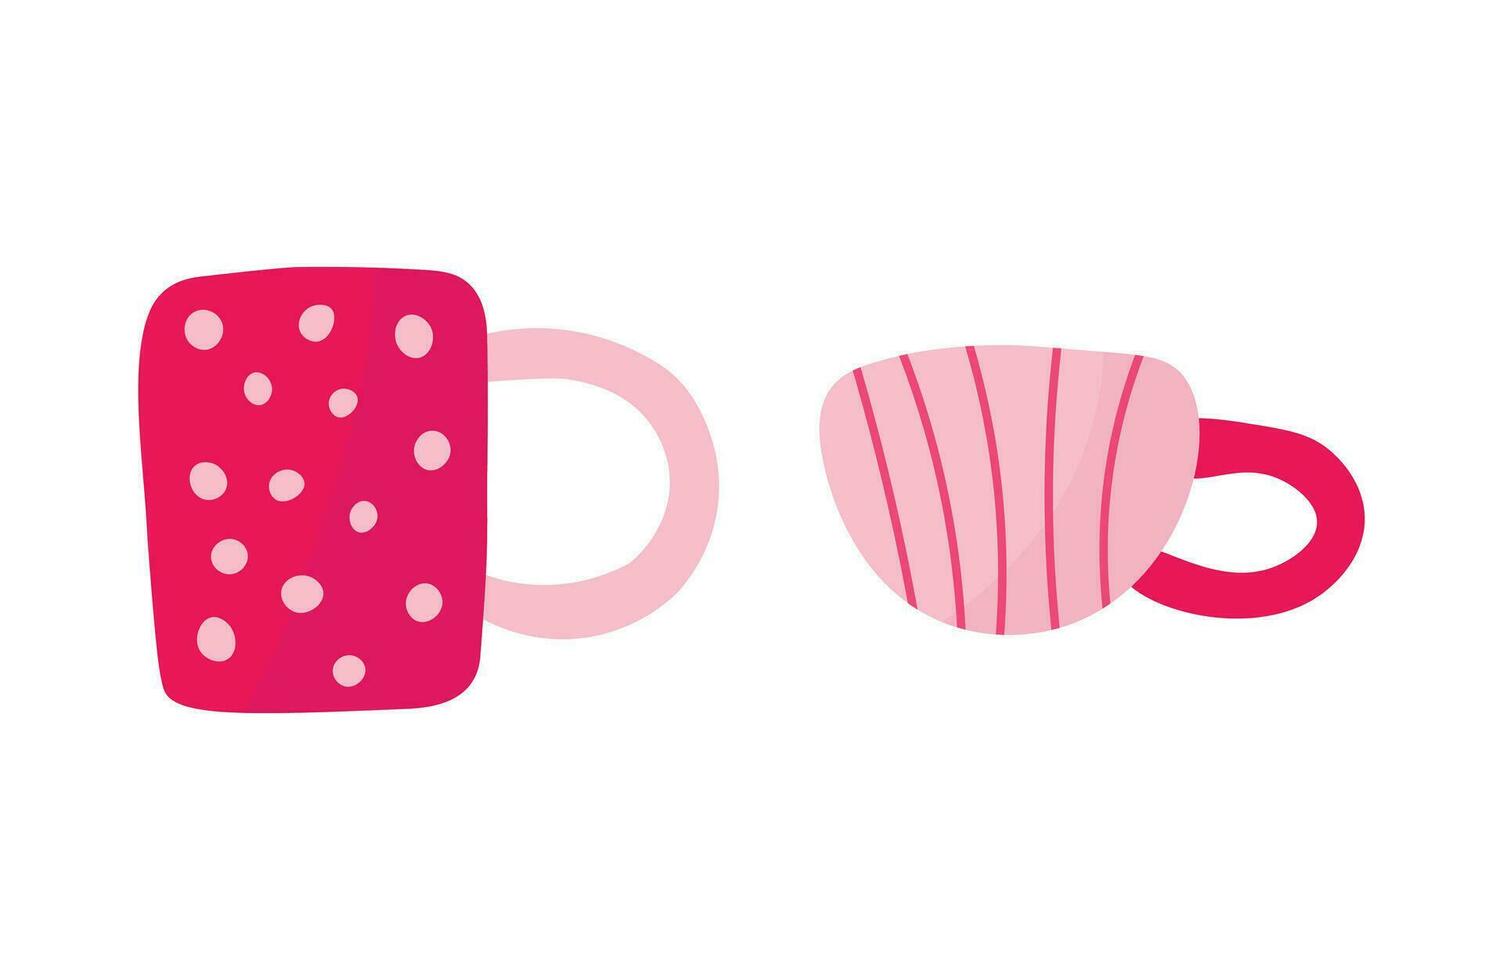 Pink coffee and tea cups set of illustrations. Girly tea pink items for hot drink. vector